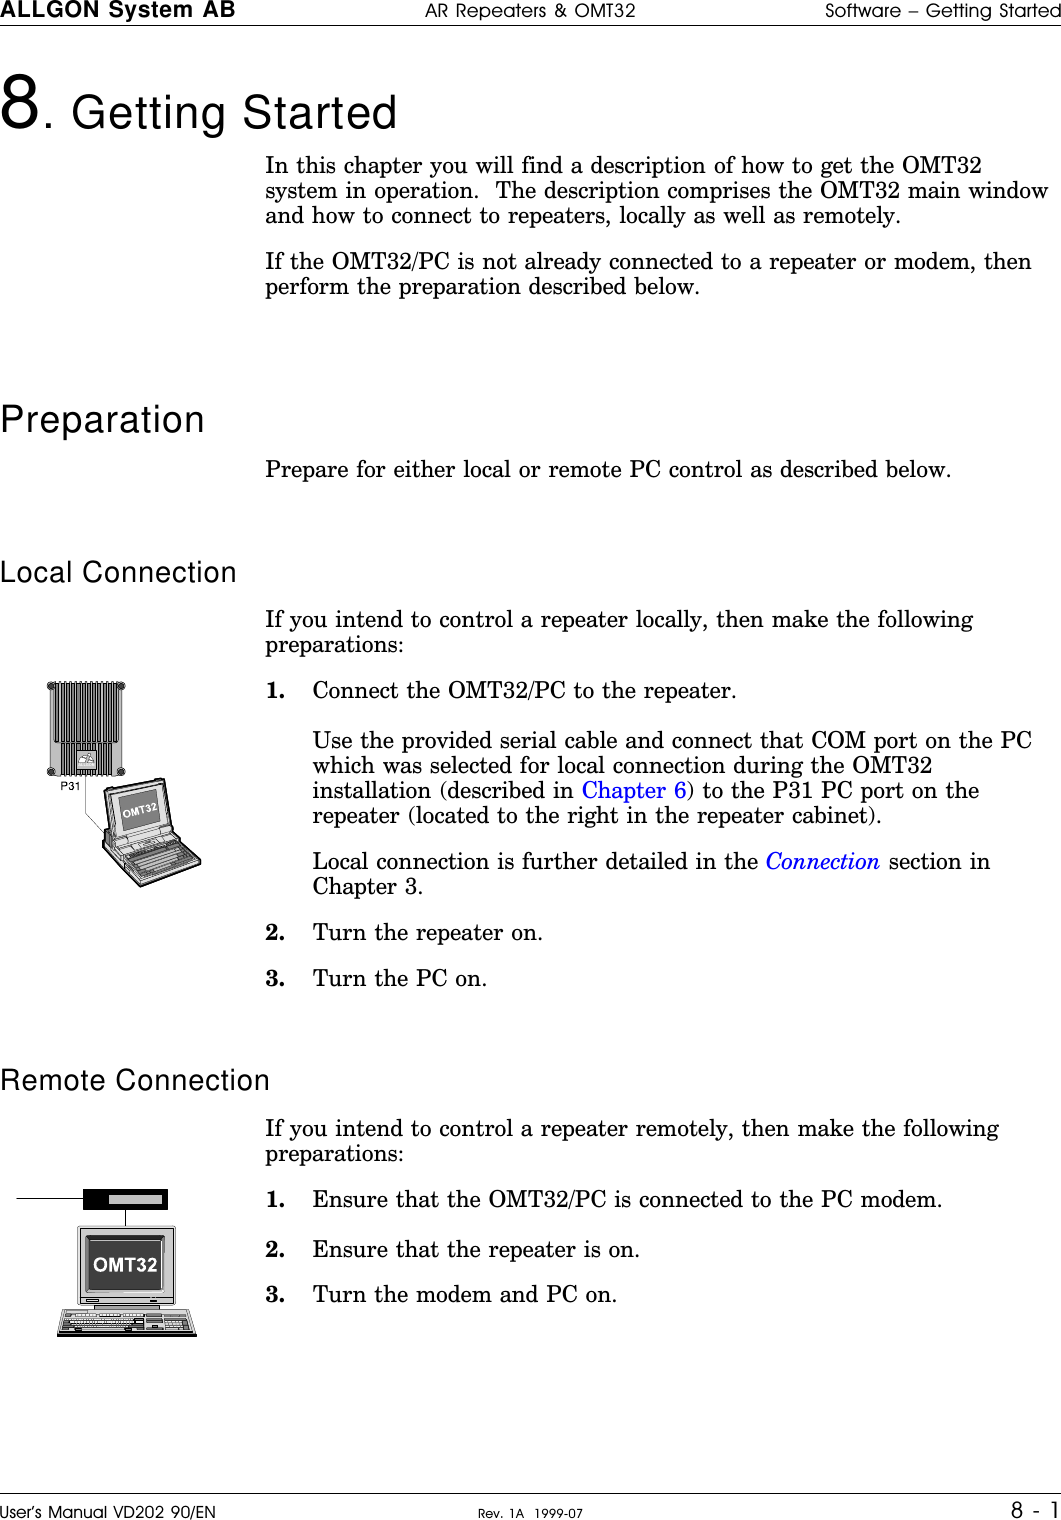 8. Getting Started In this chapter you will find a description of how to get the OMT32system in operation.  The description comprises the OMT32 main windowand how to connect to repeaters, locally as well as remotely.If the OMT32/PC is not already connected to a repeater or modem, thenperform the preparation described below.Preparation   Prepare for either local or remote PC control as described below.Local ConnectionIf you intend to control a repeater locally, then make the followingpreparations:1. Connect the OMT32/PC to the repeater.Use the provided serial cable and connect that COM port on the PCwhich was selected for local connection during the OMT32installation (described in Chapter 6) to the P31 PC port on therepeater (located to the right in the repeater cabinet).Local connection is further detailed in the Connection section inChapter 3.2. Turn the repeater on.3. Turn the PC on.Remote ConnectionIf you intend to control a repeater remotely, then make the followingpreparations:1. Ensure that the OMT32/PC is connected to the PC modem.2. Ensure that the repeater is on.3. Turn the modem and PC on.ALLGONALLGON System AB AR Repeaters &amp; OMT32 Software – Getting StartedUser’s Manual VD202 90/EN Rev. 1A  1999-07 8 - 1